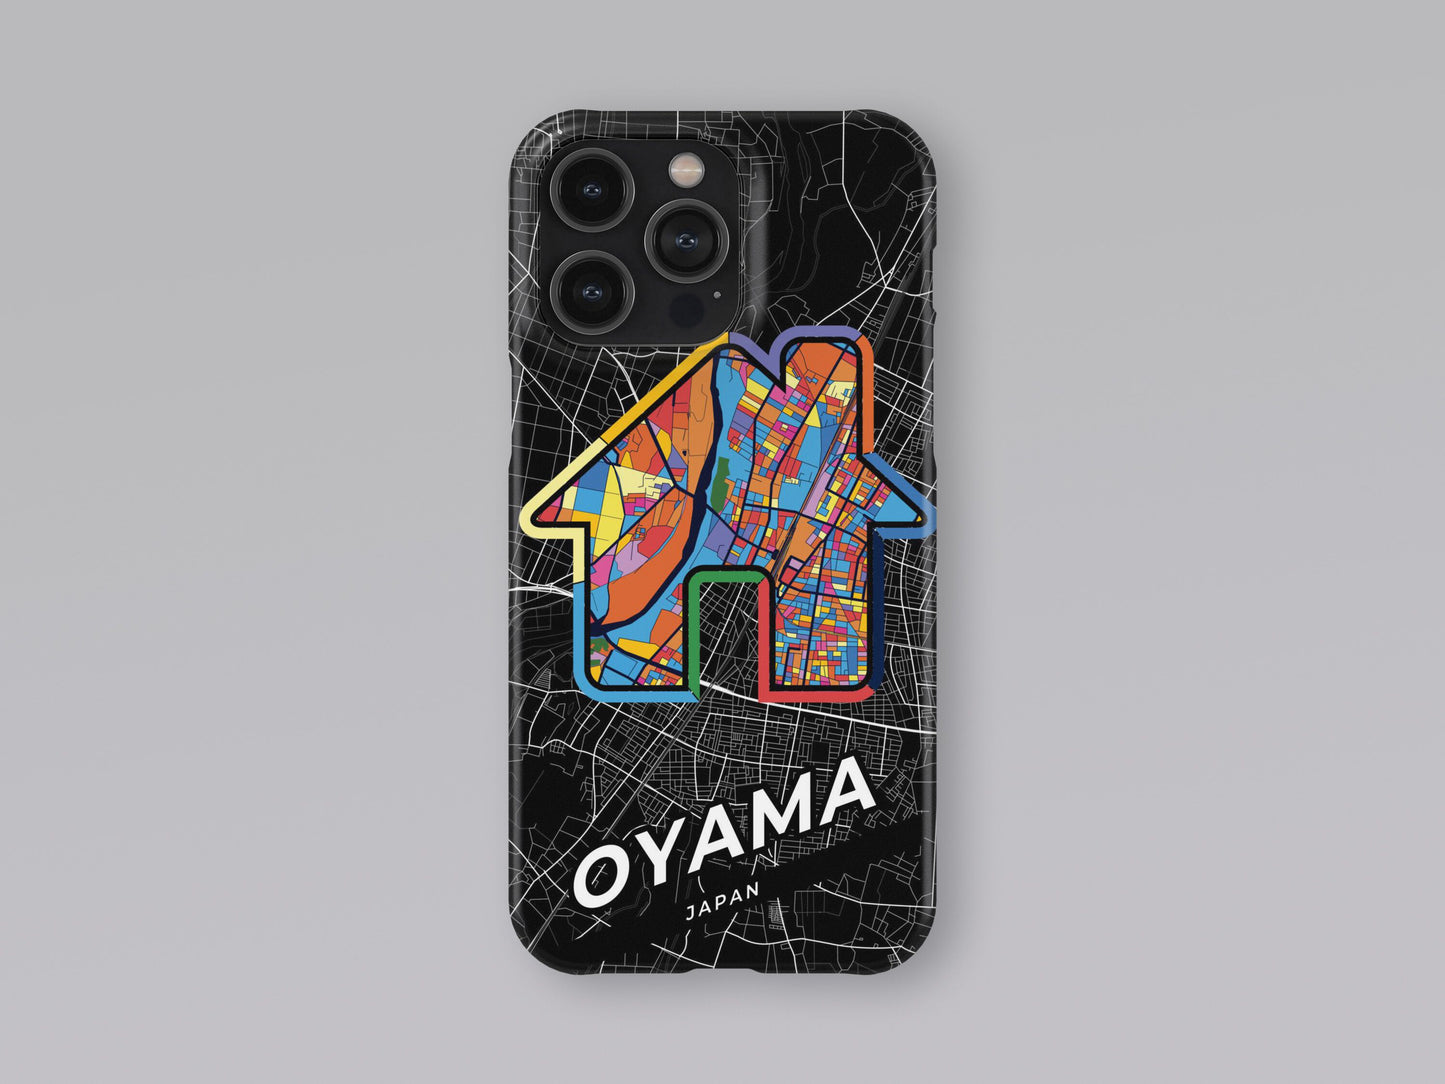 Oyama Japan slim phone case with colorful icon 3